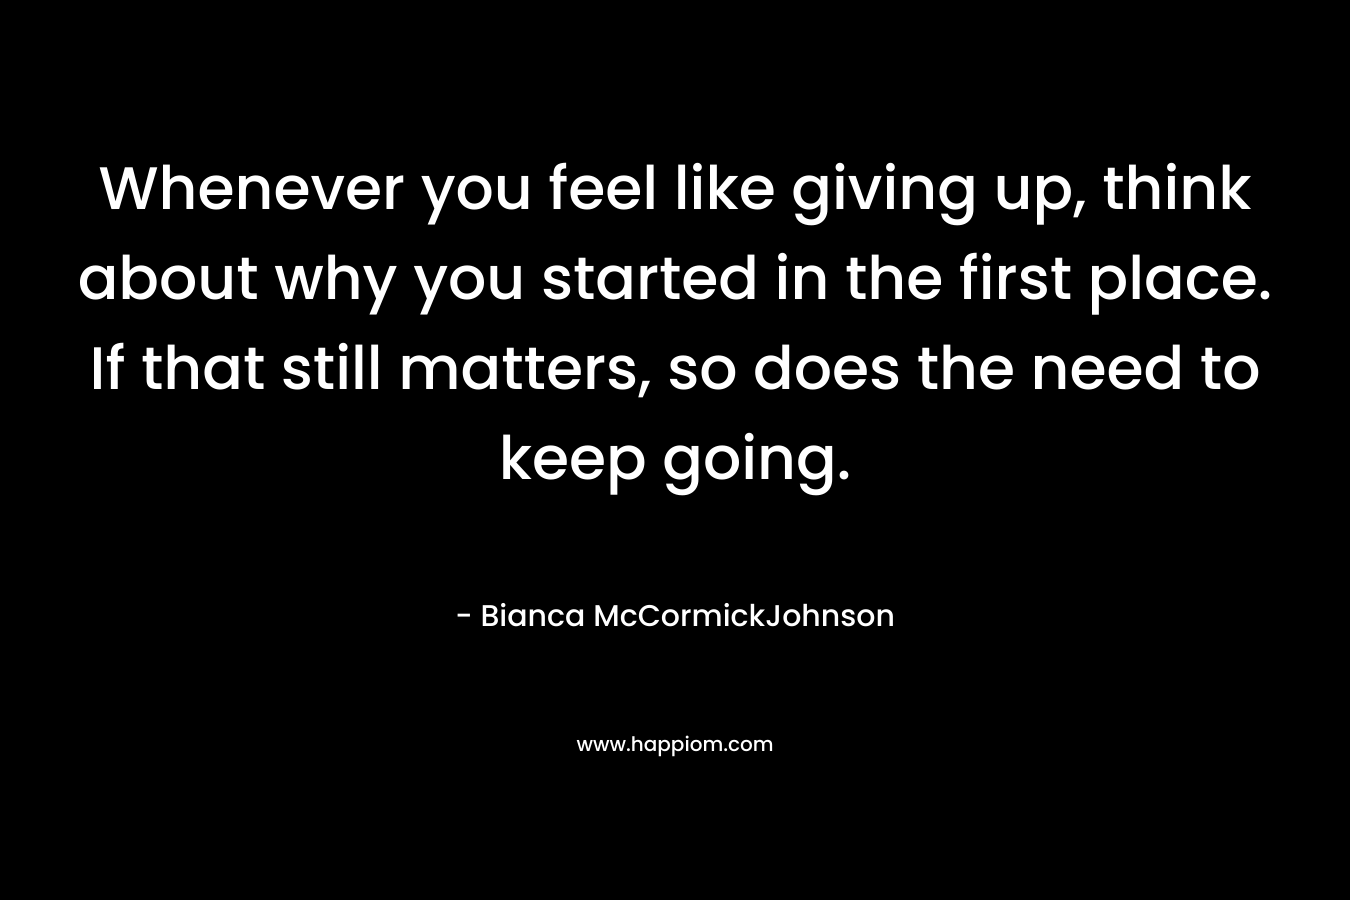 Whenever you feel like giving up, think about why you started in the first place. If that still matters, so does the need to keep going.